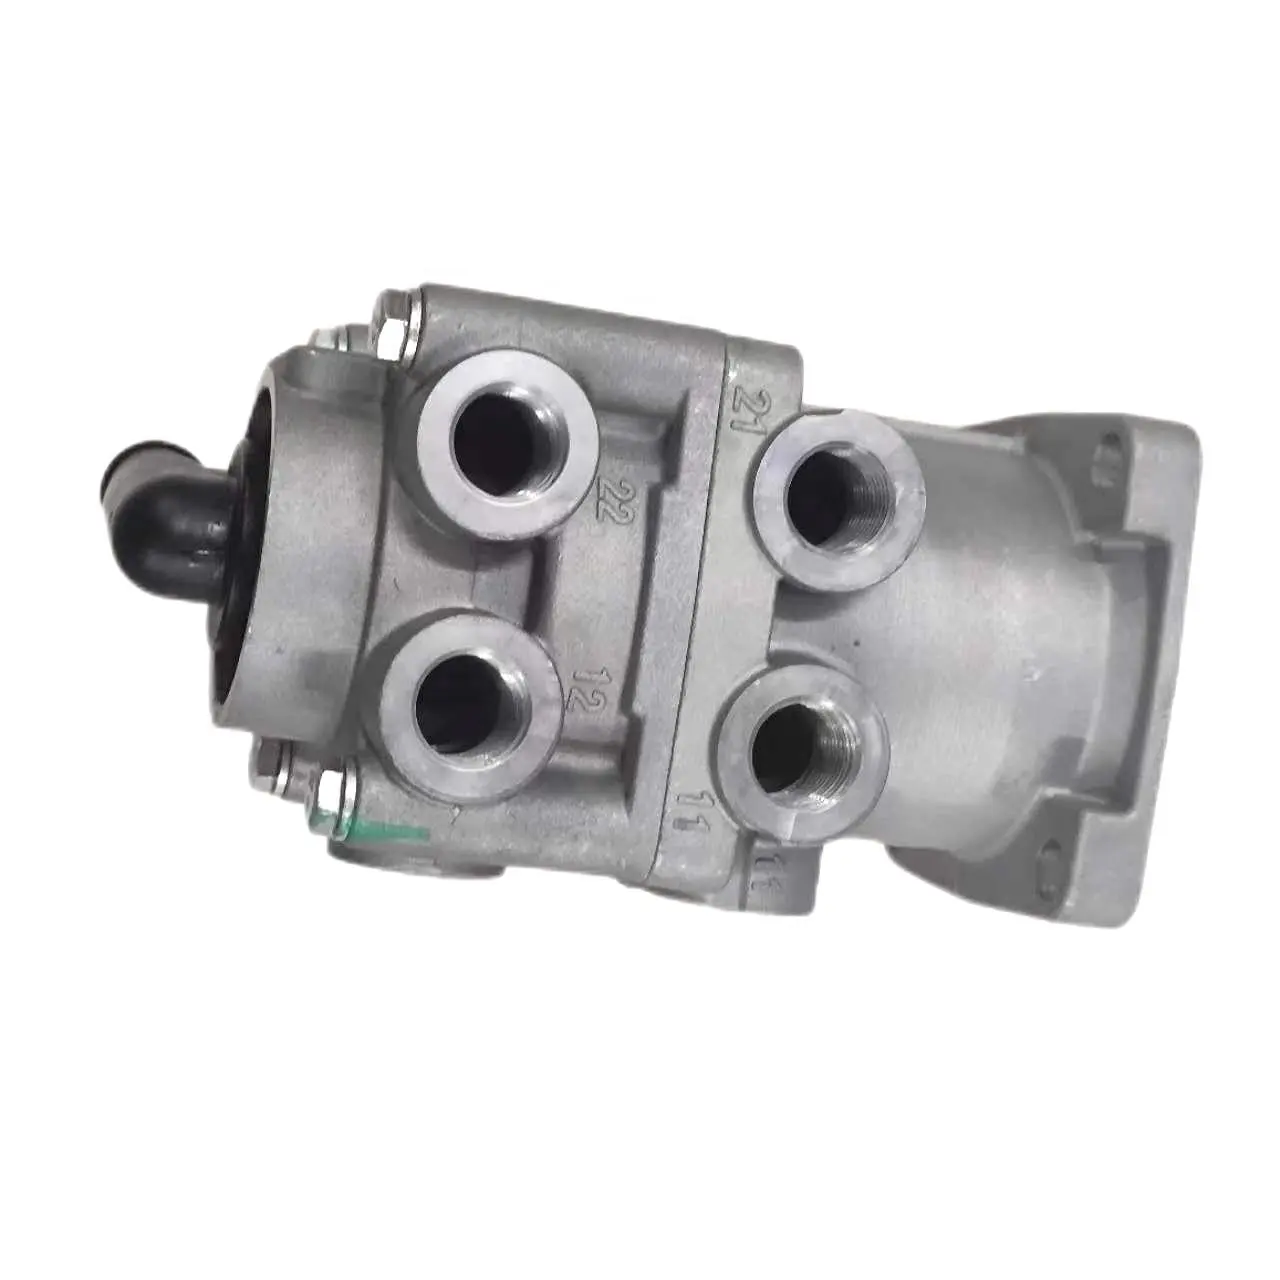 Brake valve for front lift  stacking machine number T22036825